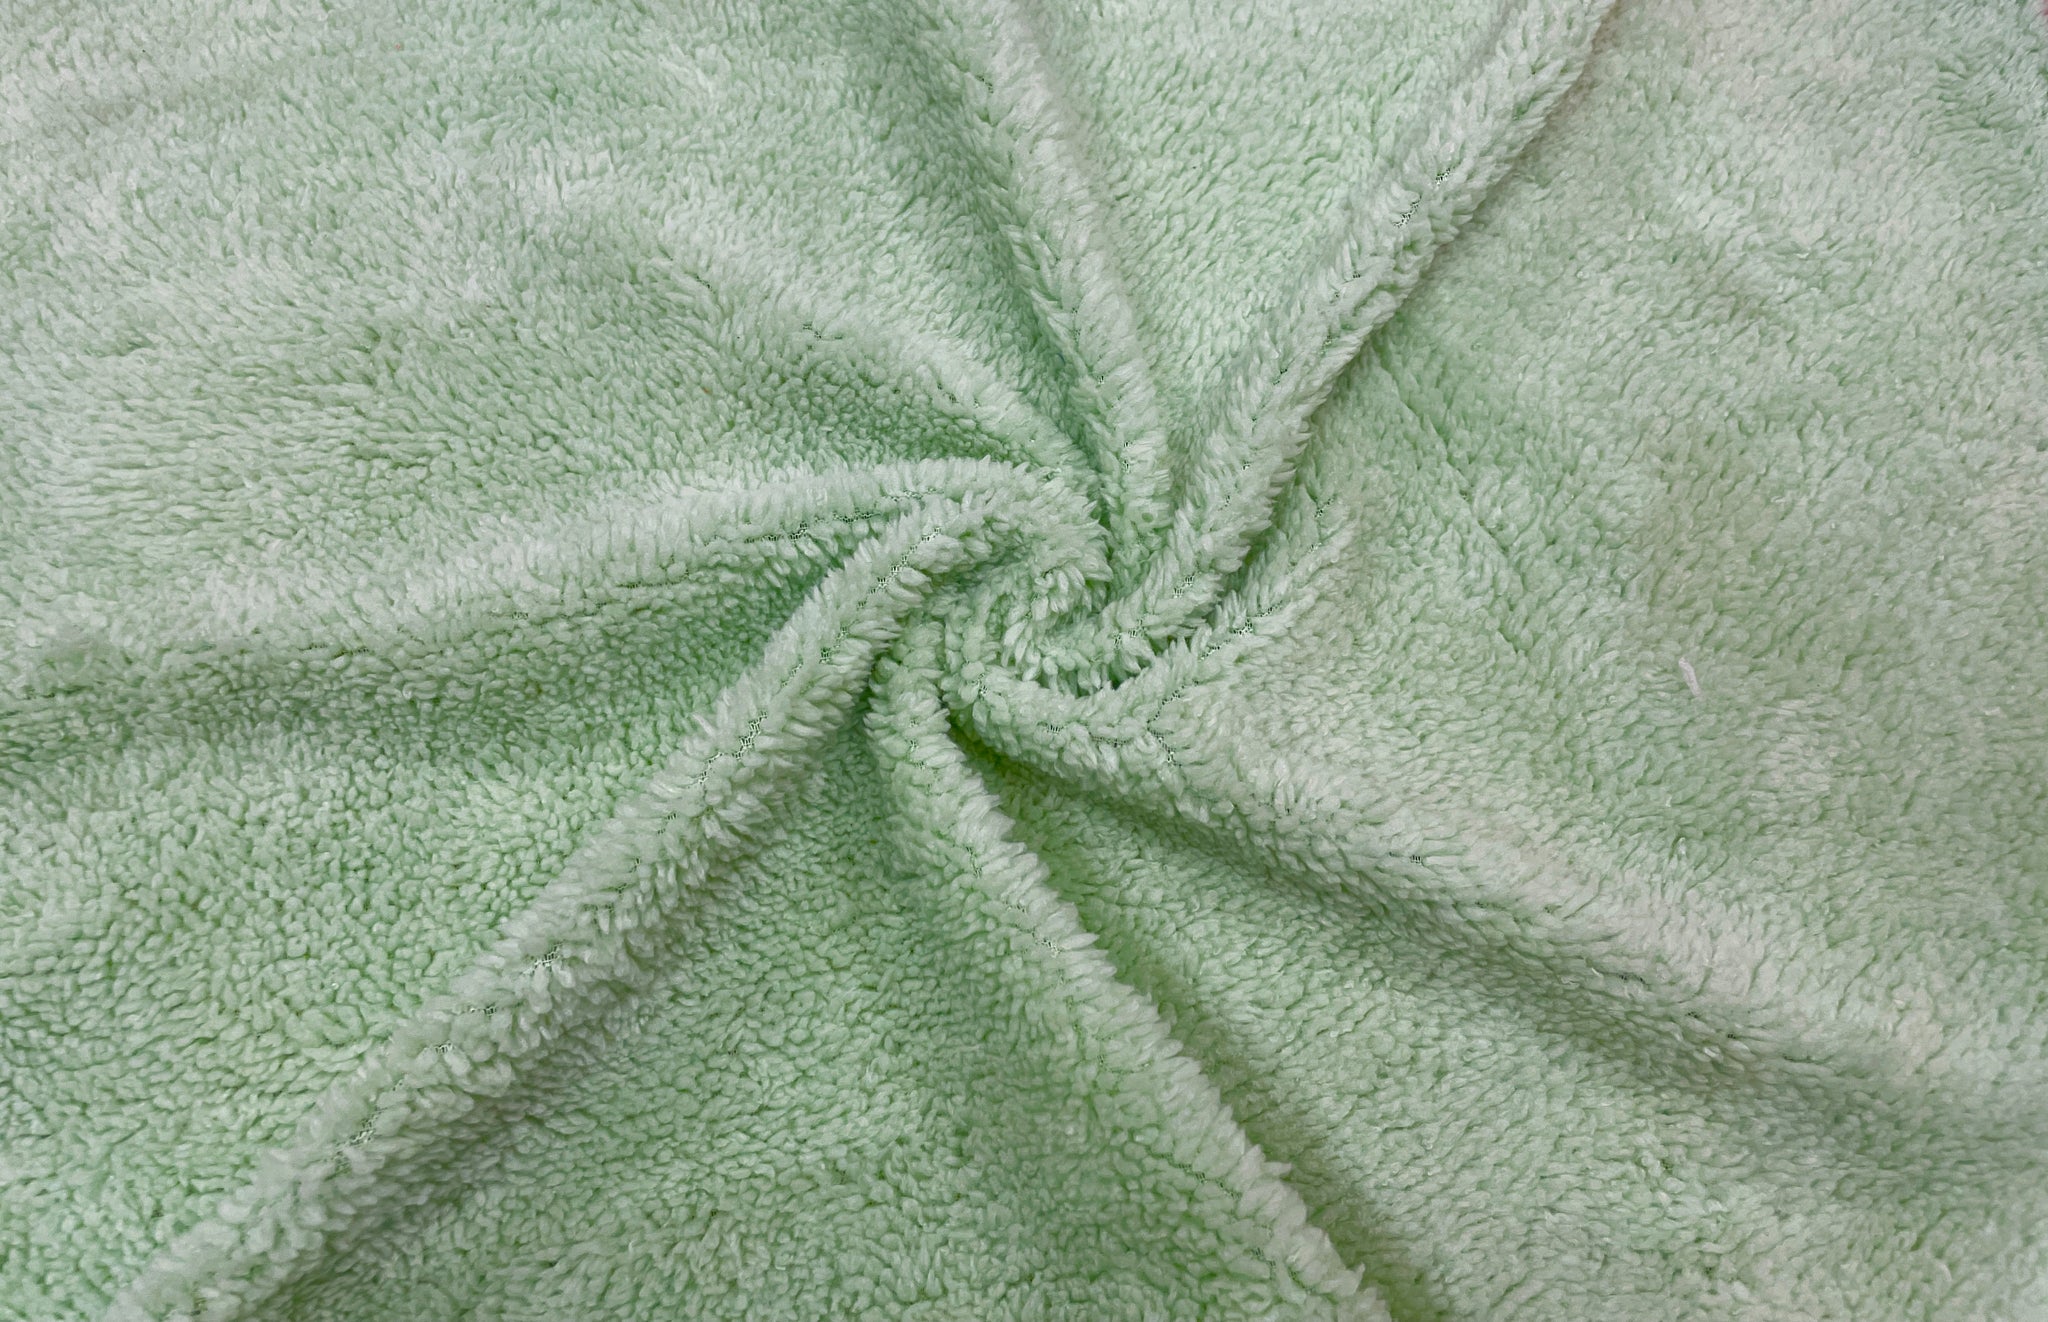 58 Green Poly Blend Stretch Terry Cloth Fabric by the Yard